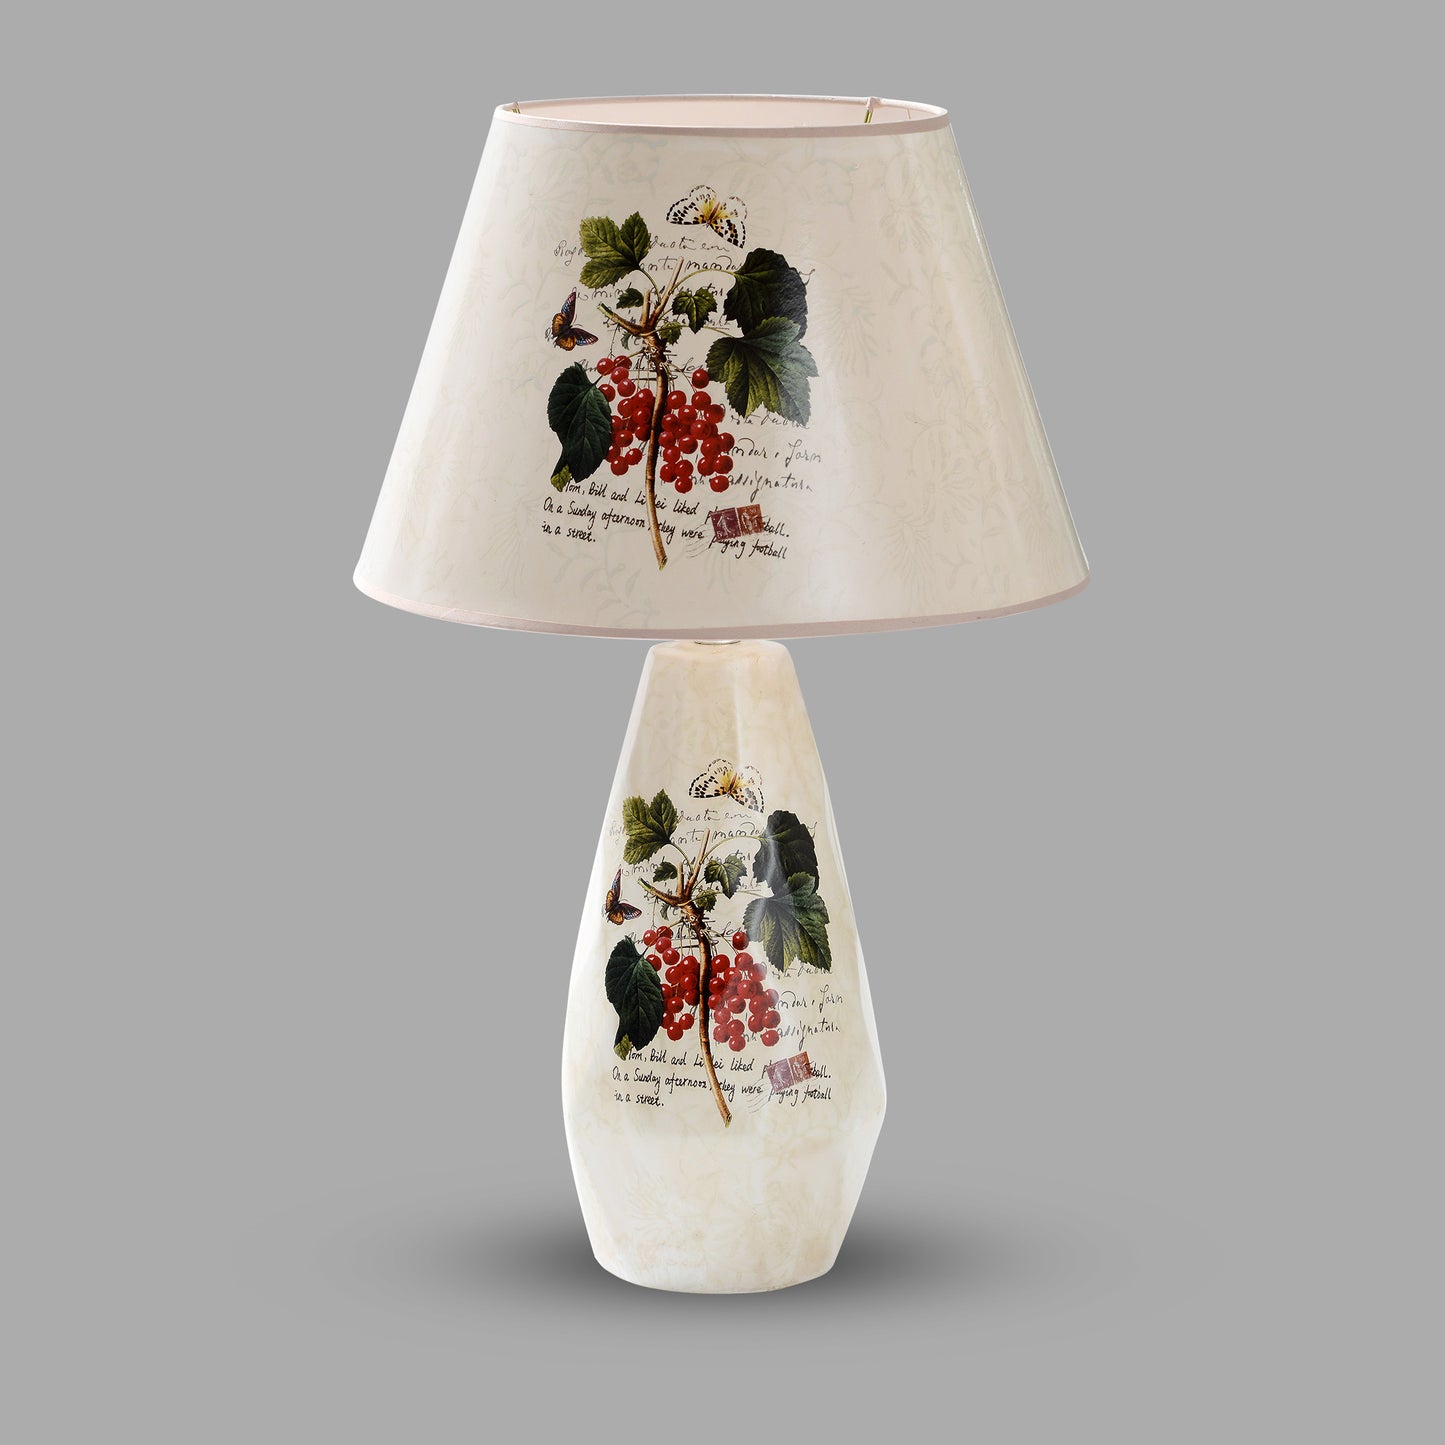 The Cherry Ceramic Table Lamp with Shade